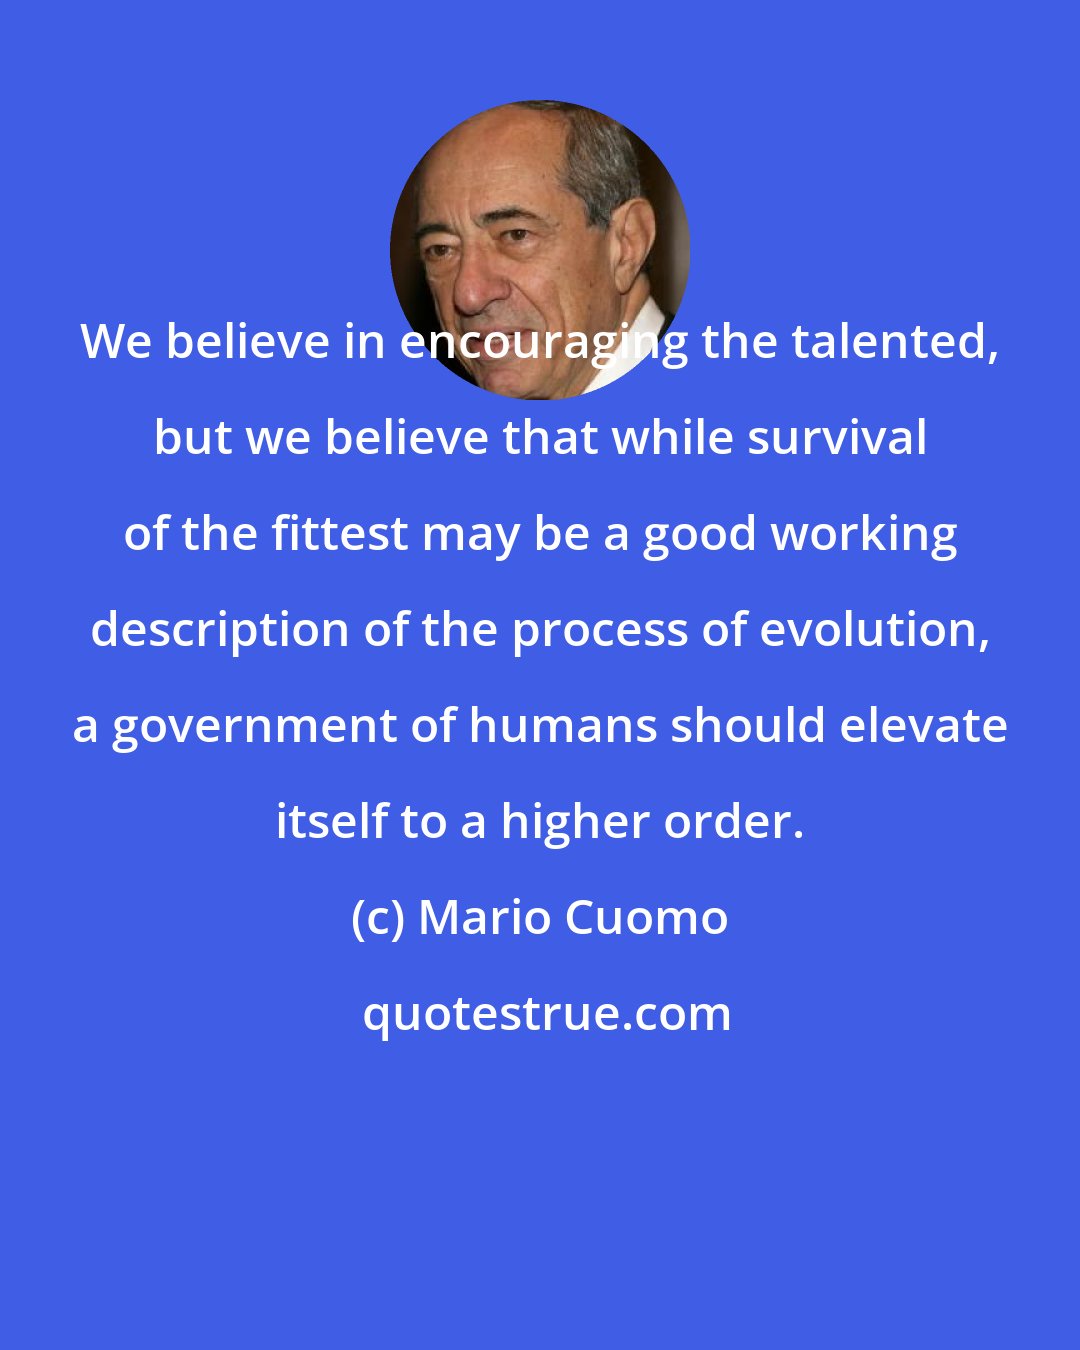 Mario Cuomo: We believe in encouraging the talented, but we believe that while survival of the fittest may be a good working description of the process of evolution, a government of humans should elevate itself to a higher order.